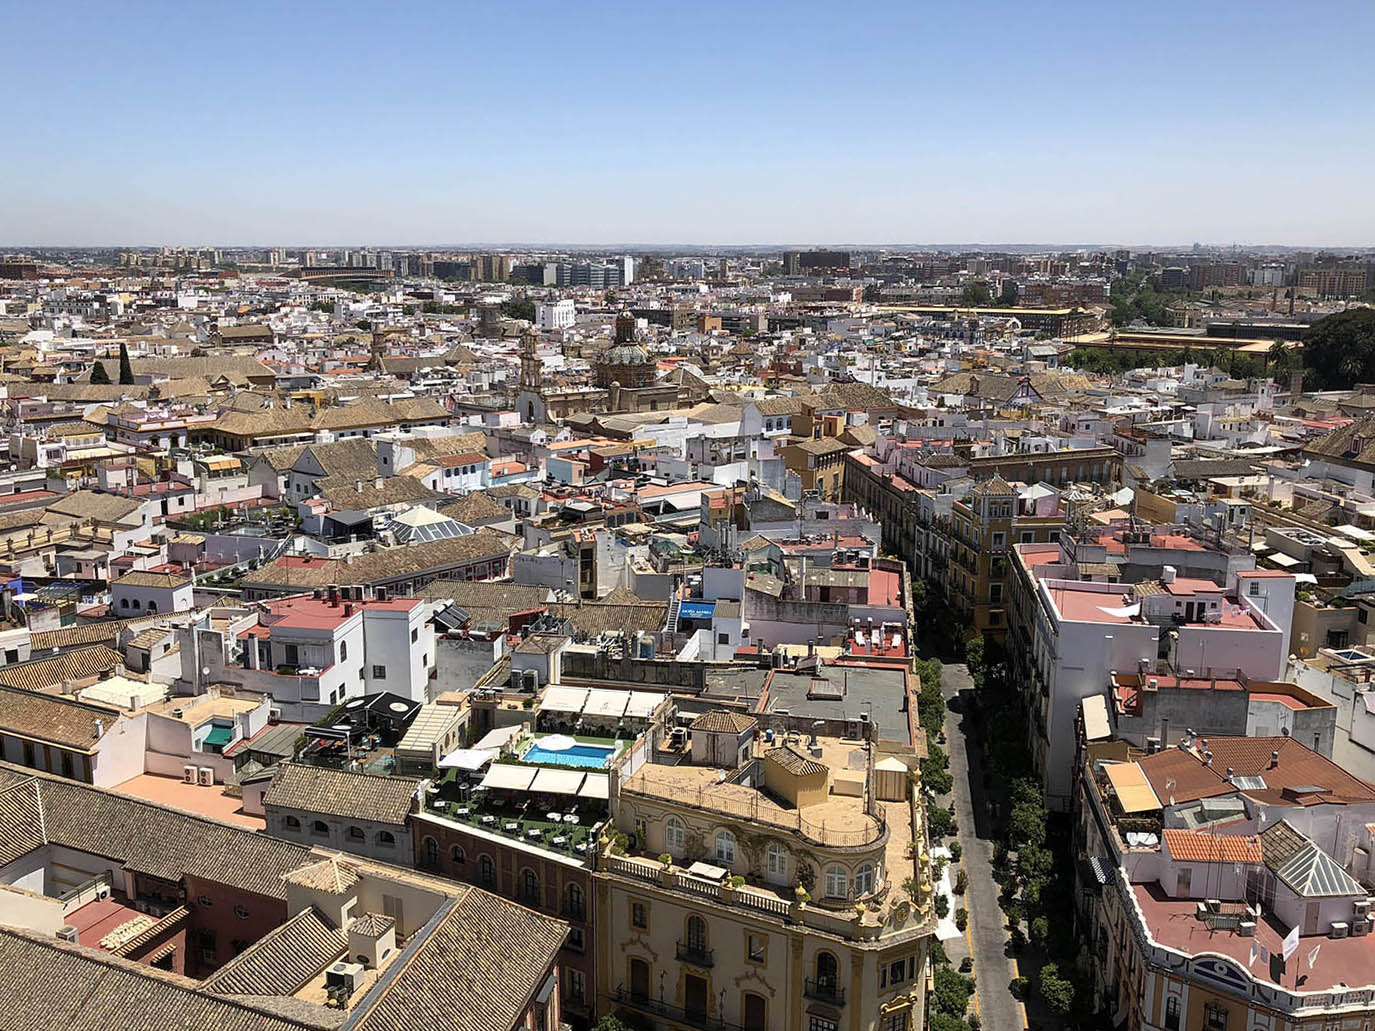 General view of Seville from La Giralda tower.